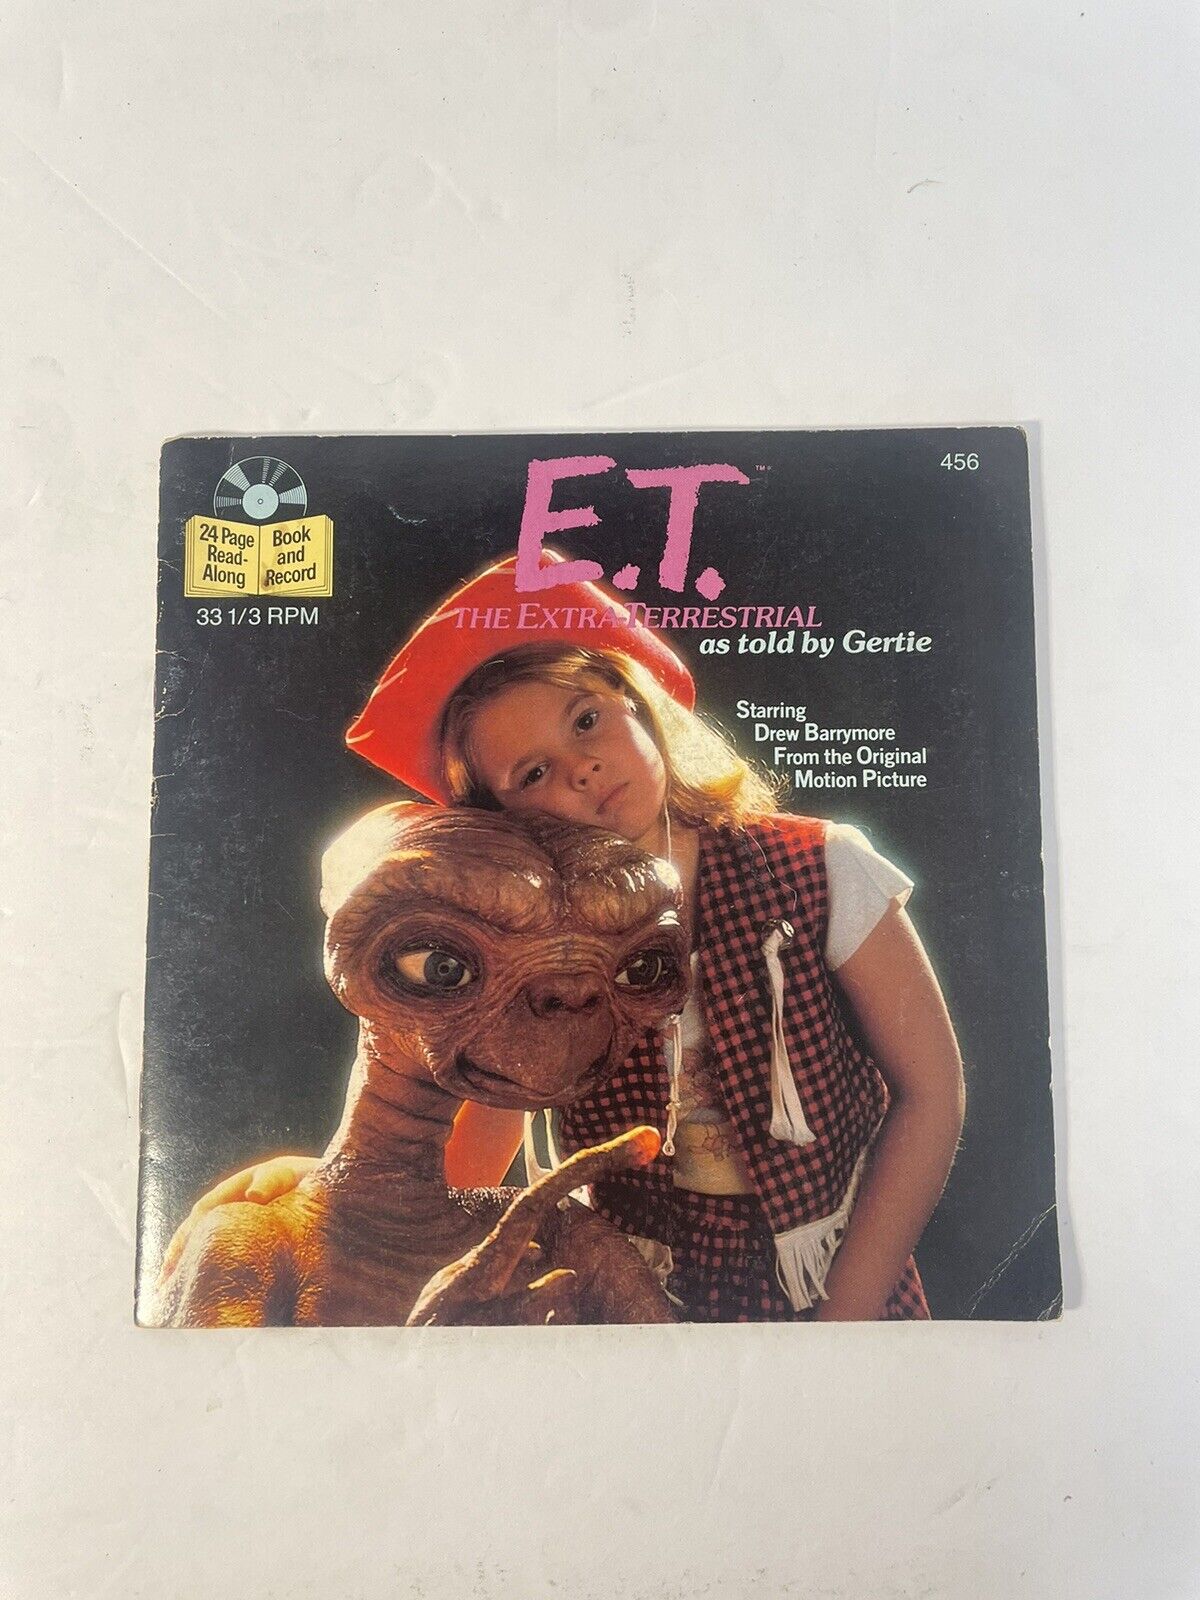 E.T. The Extra-Terrestrial 24 page Read Along Book and Record 1982 Universal